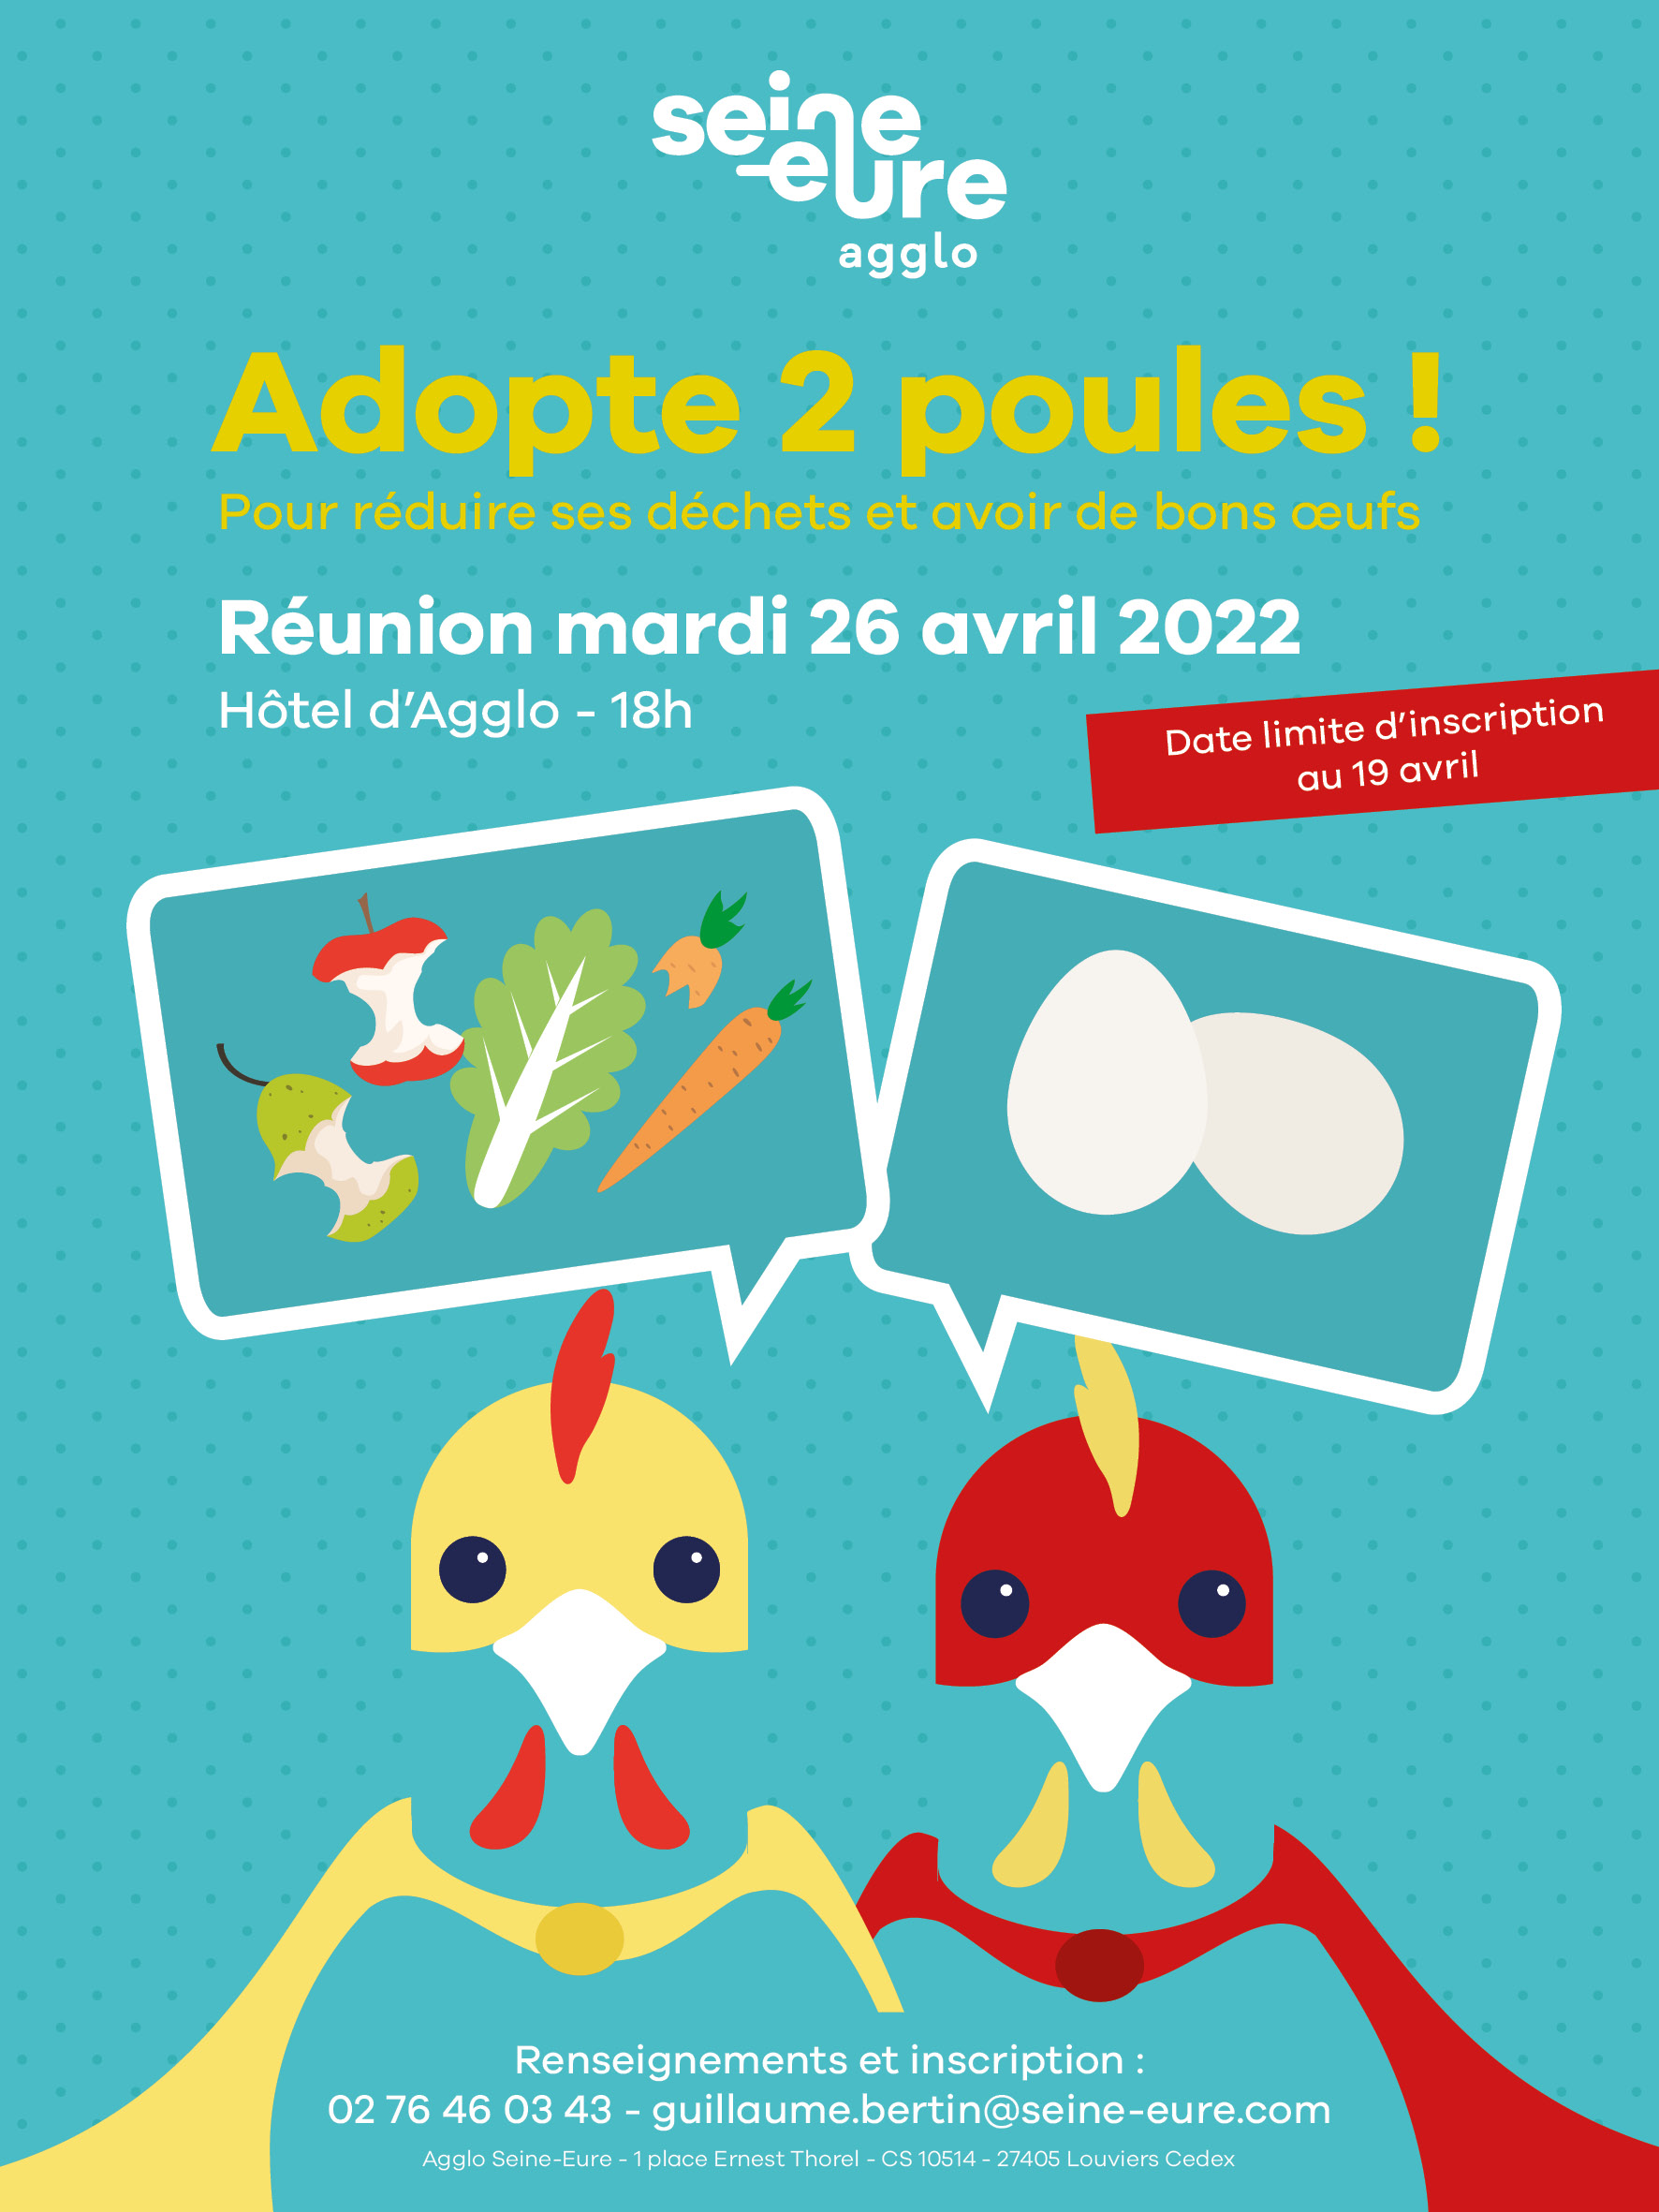 Affiche30x40 adopte2poules avril2022